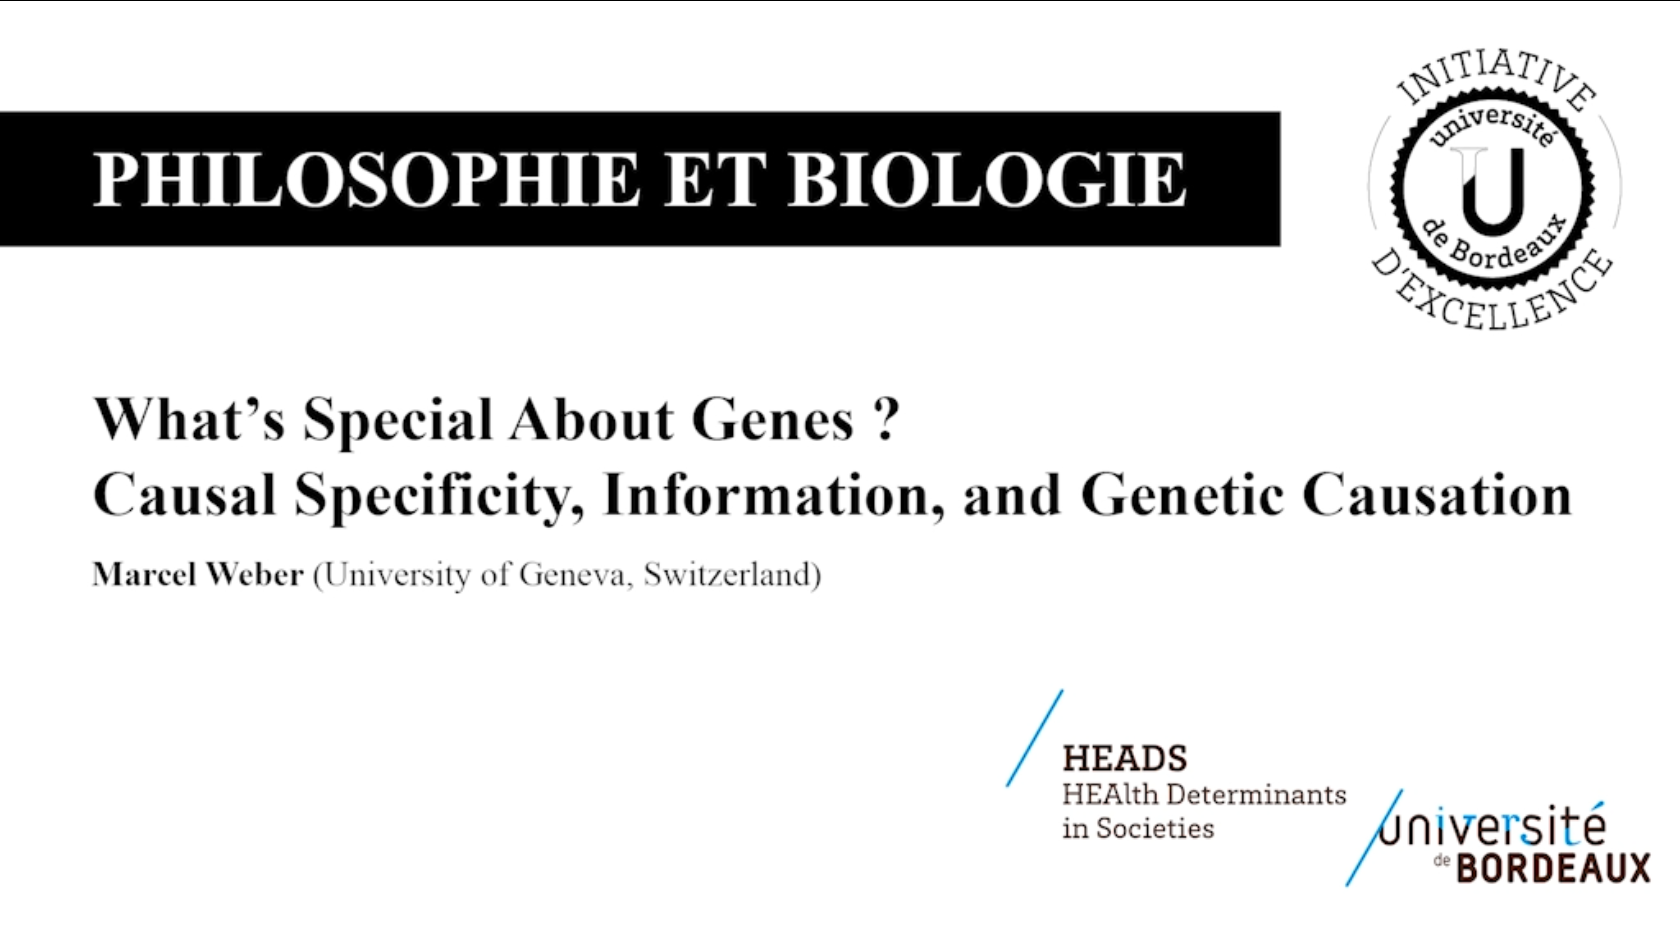 What’s Special About Genes? Causal Specificity, Information, and Genetic